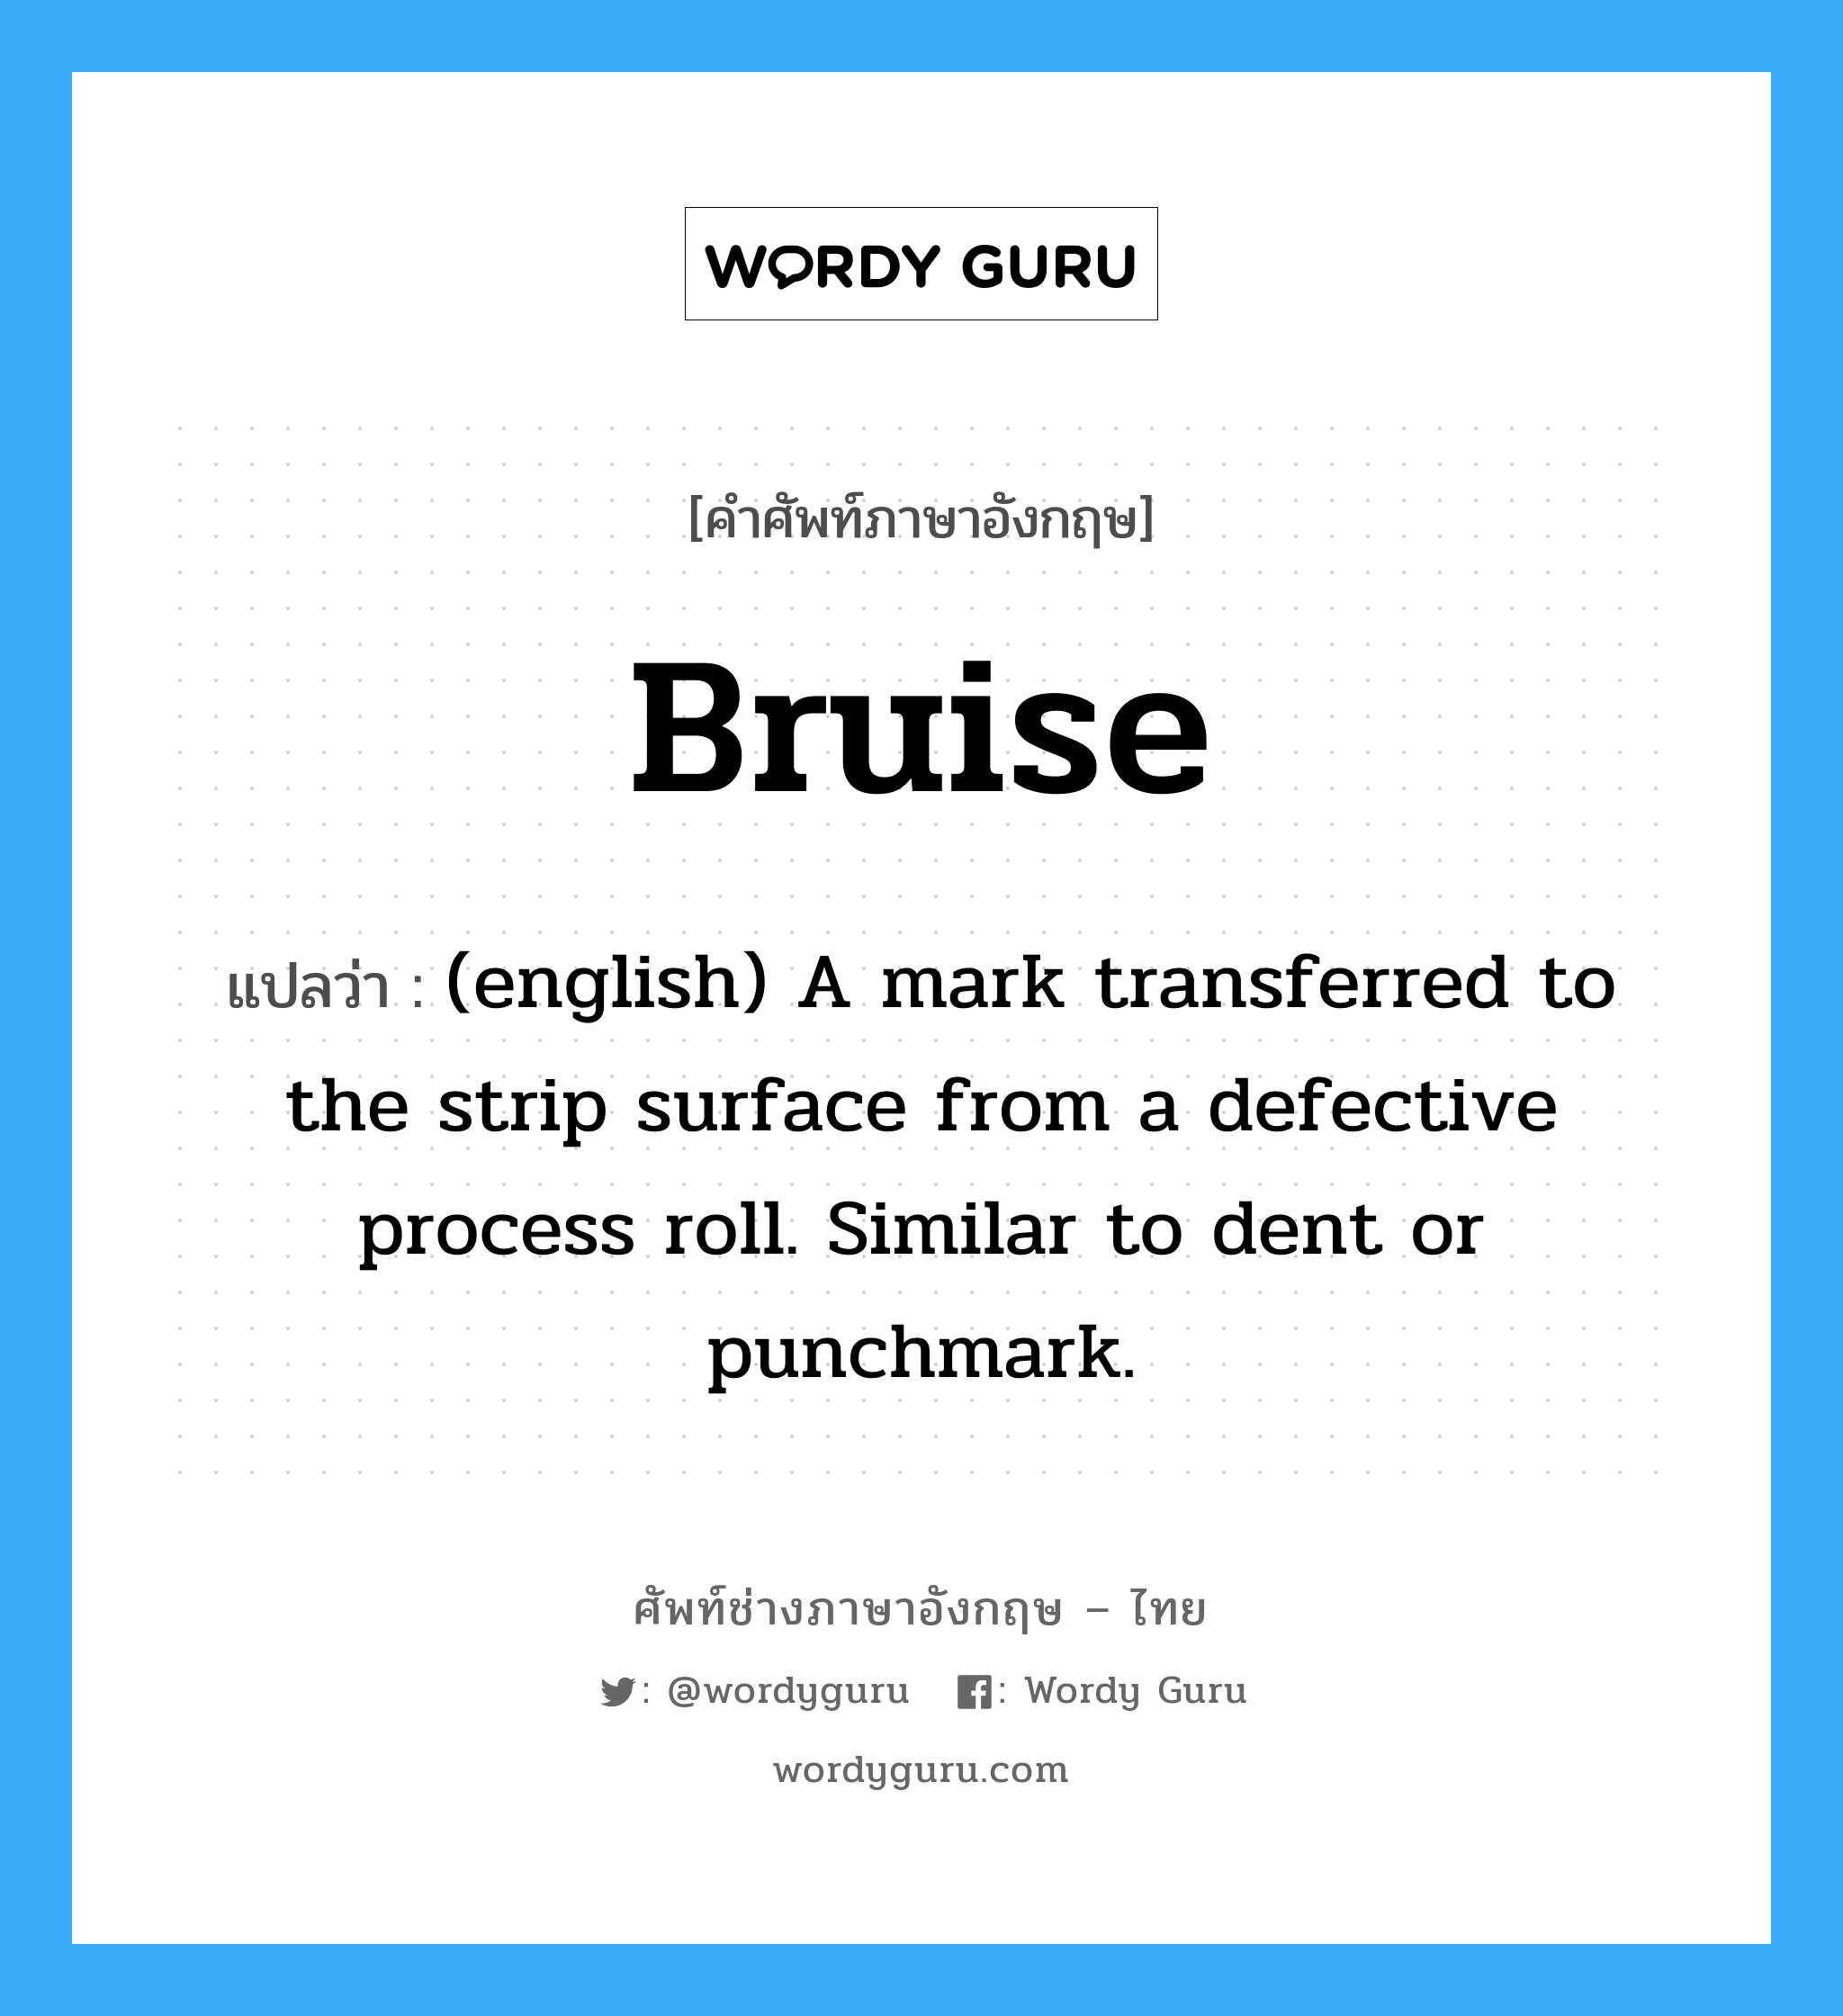 Bruise แปลว่า?, คำศัพท์ช่างภาษาอังกฤษ - ไทย Bruise คำศัพท์ภาษาอังกฤษ Bruise แปลว่า (english) A mark transferred to the strip surface from a defective process roll. Similar to dent or punchmark.